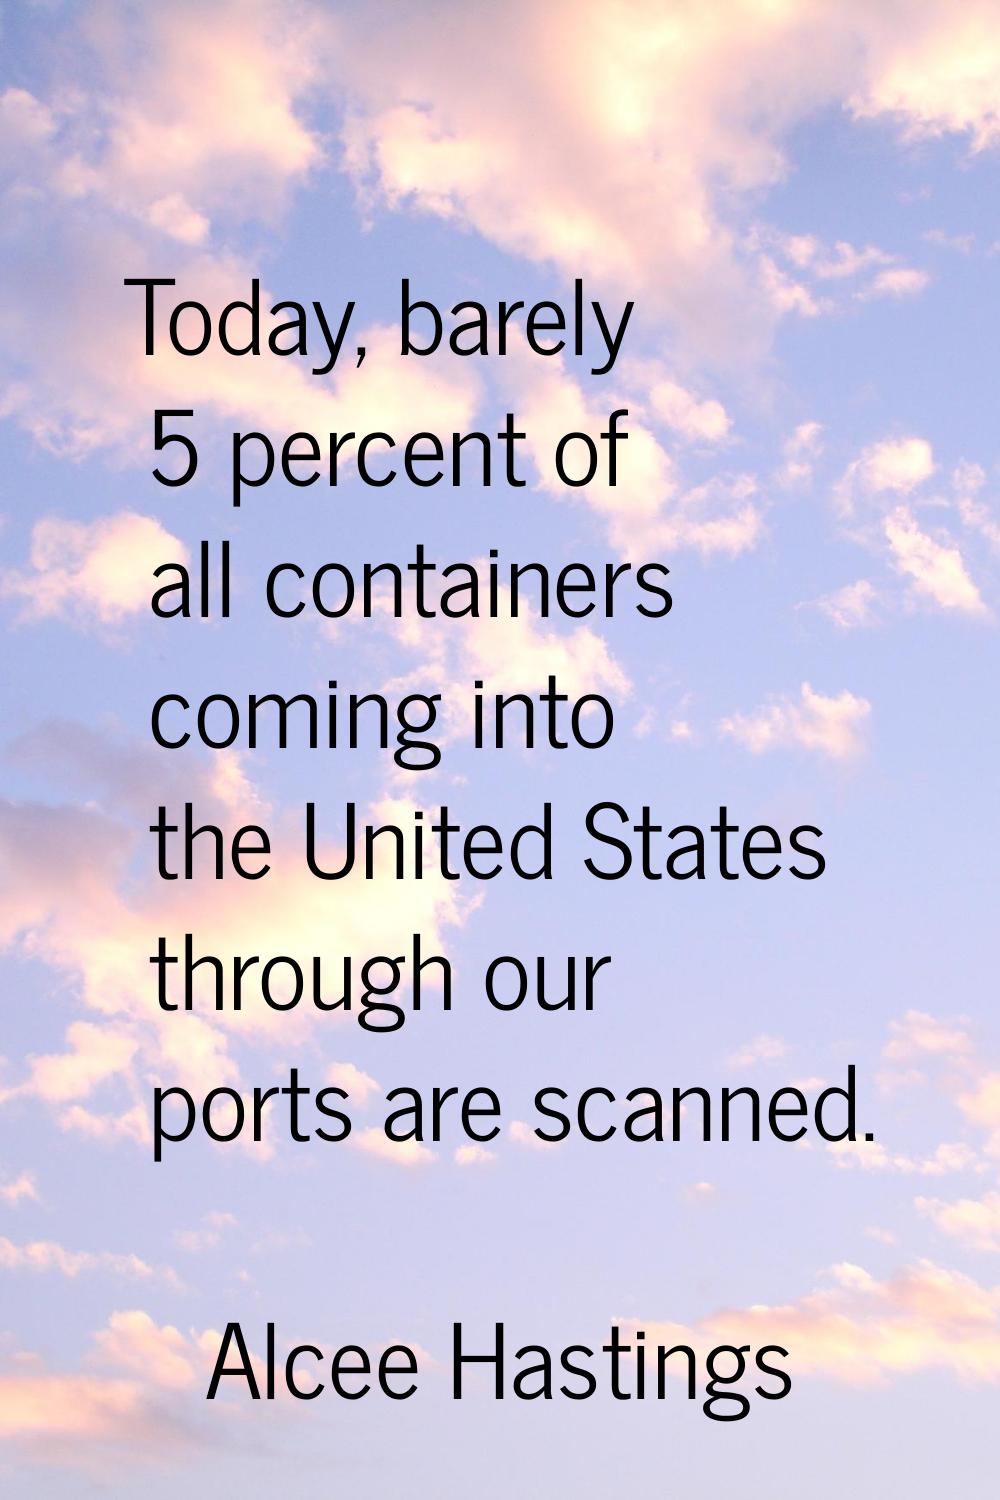 Today, barely 5 percent of all containers coming into the United States through our ports are scann